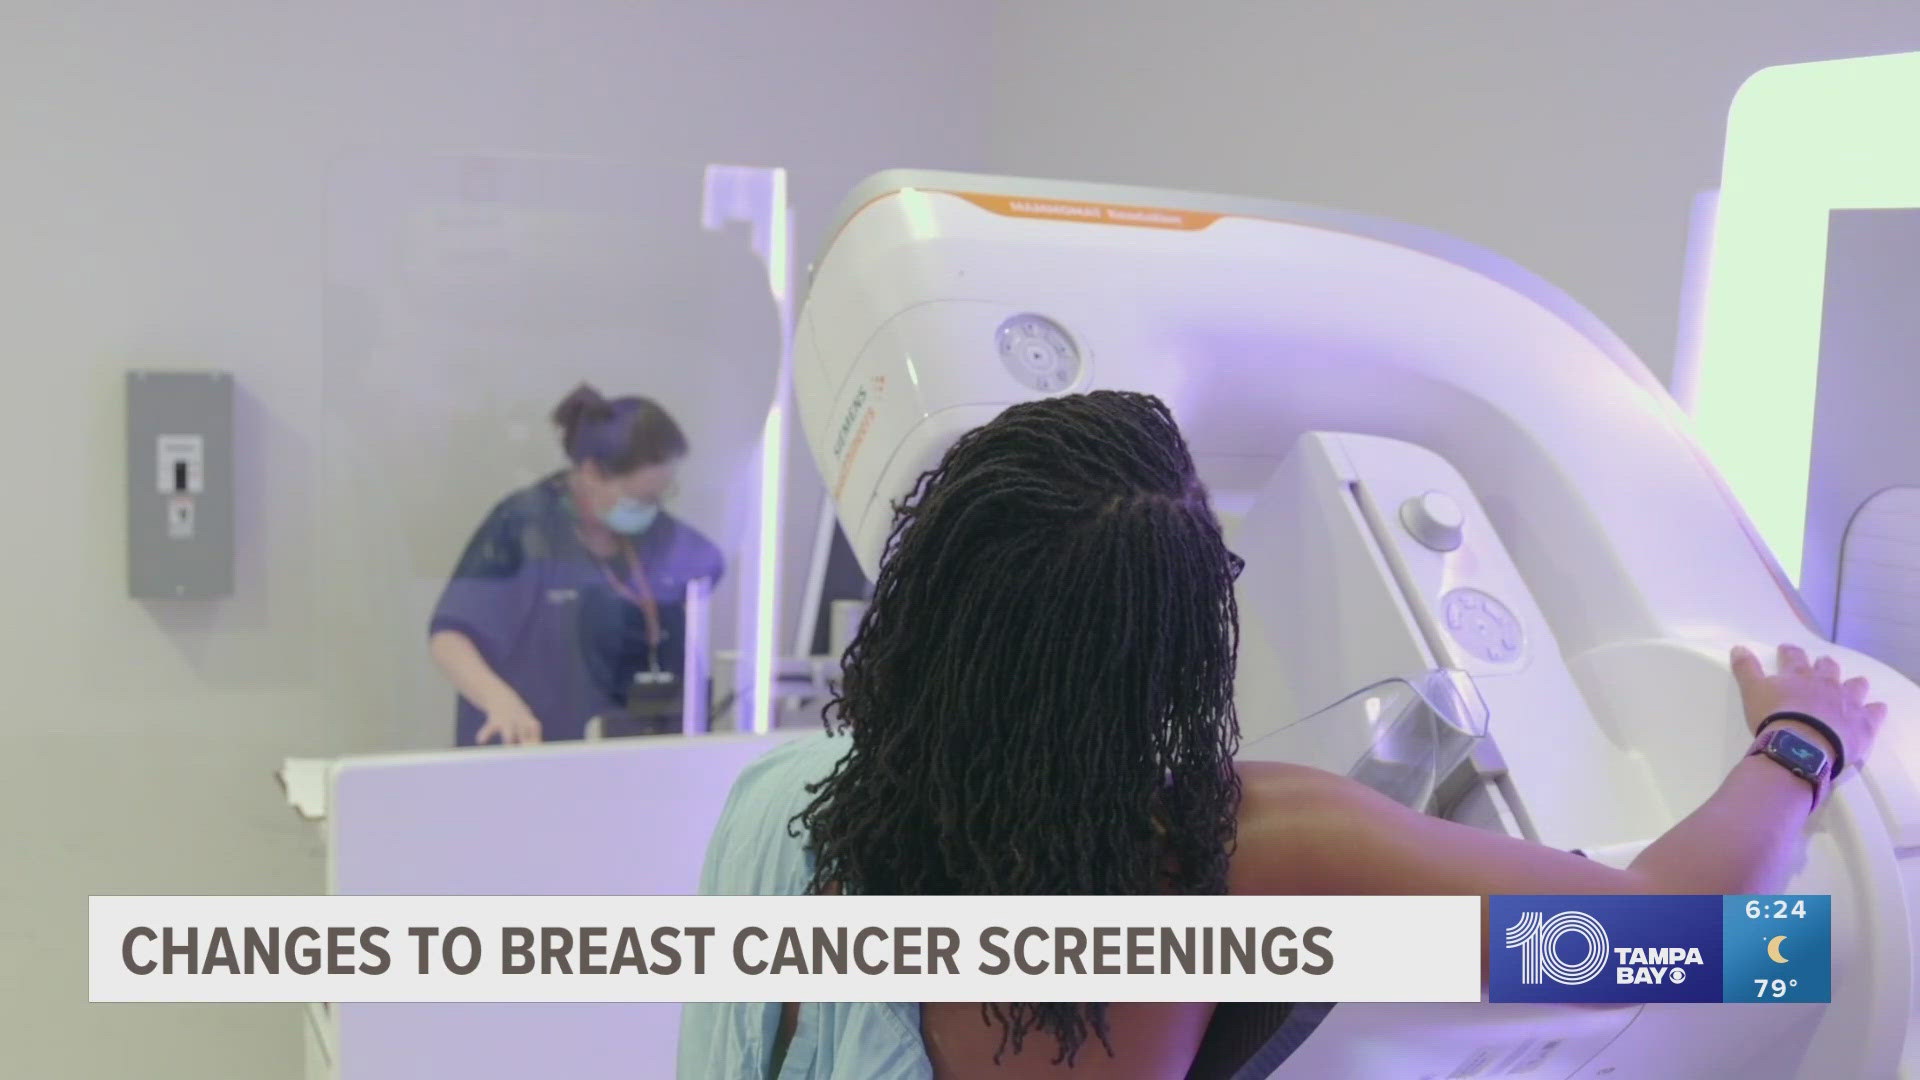 Now, the task force says women should get mammograms every other year starting at 40 instead of 50.